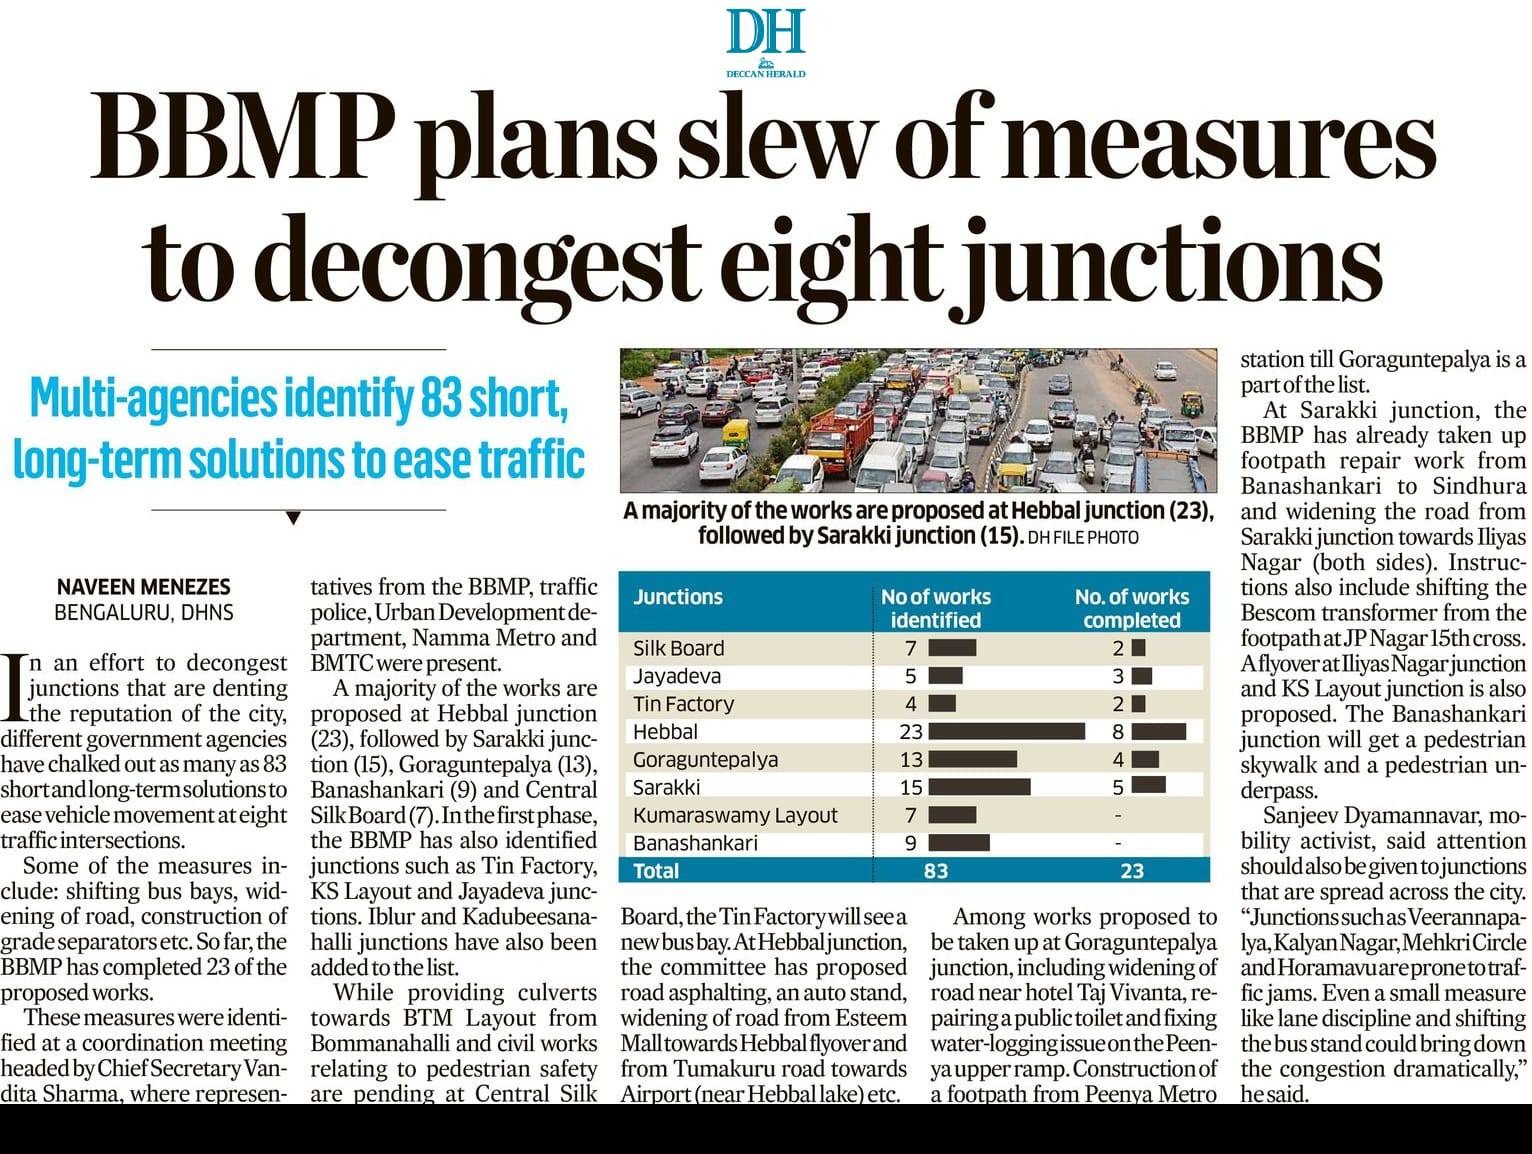 BBMP plans slew of measures to decongest eight junctions